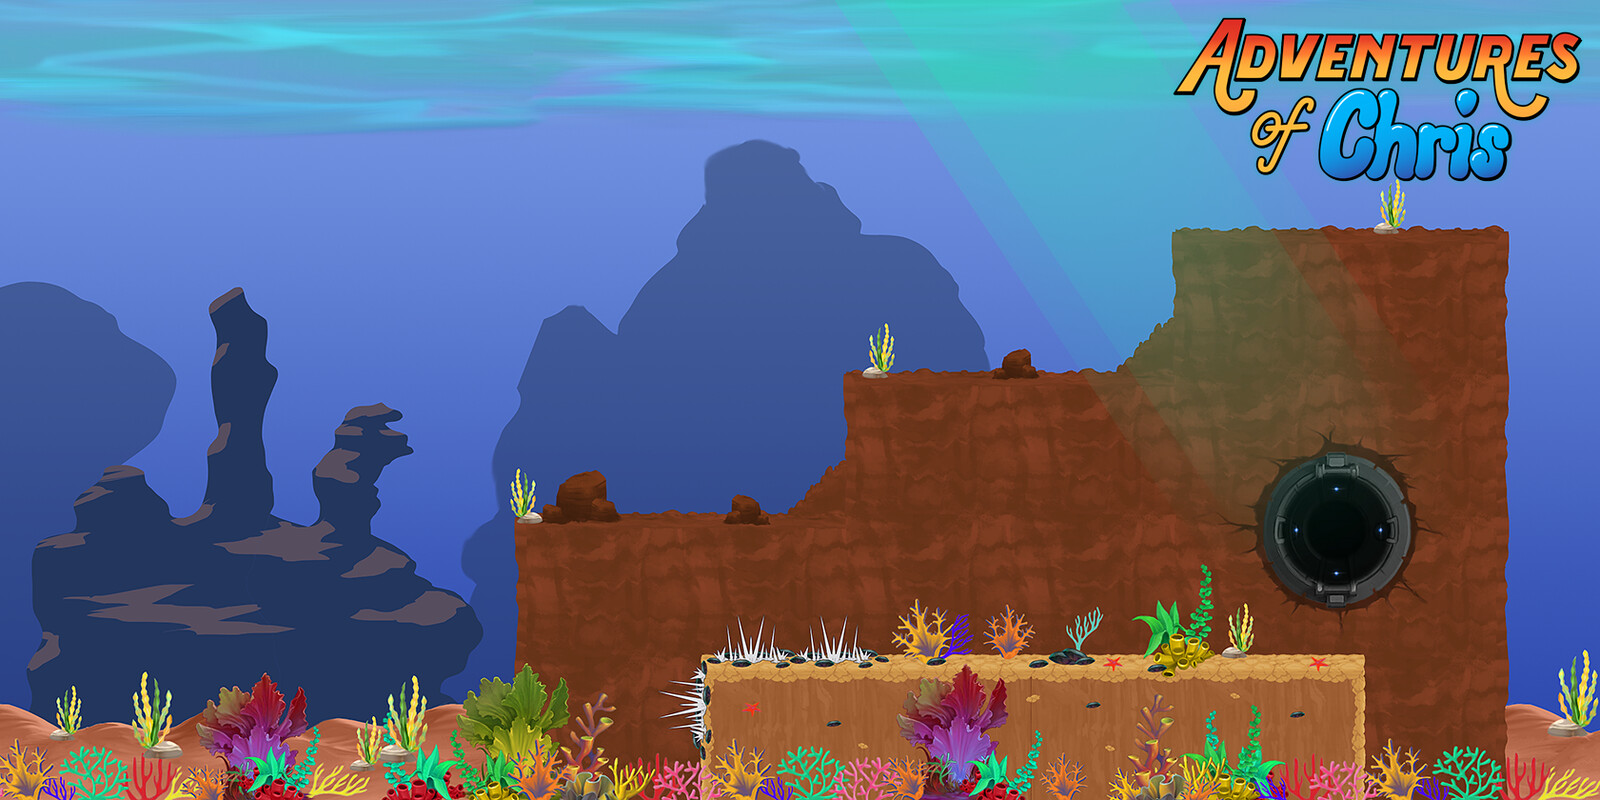 Underwater BG extended mockup with extra assets.